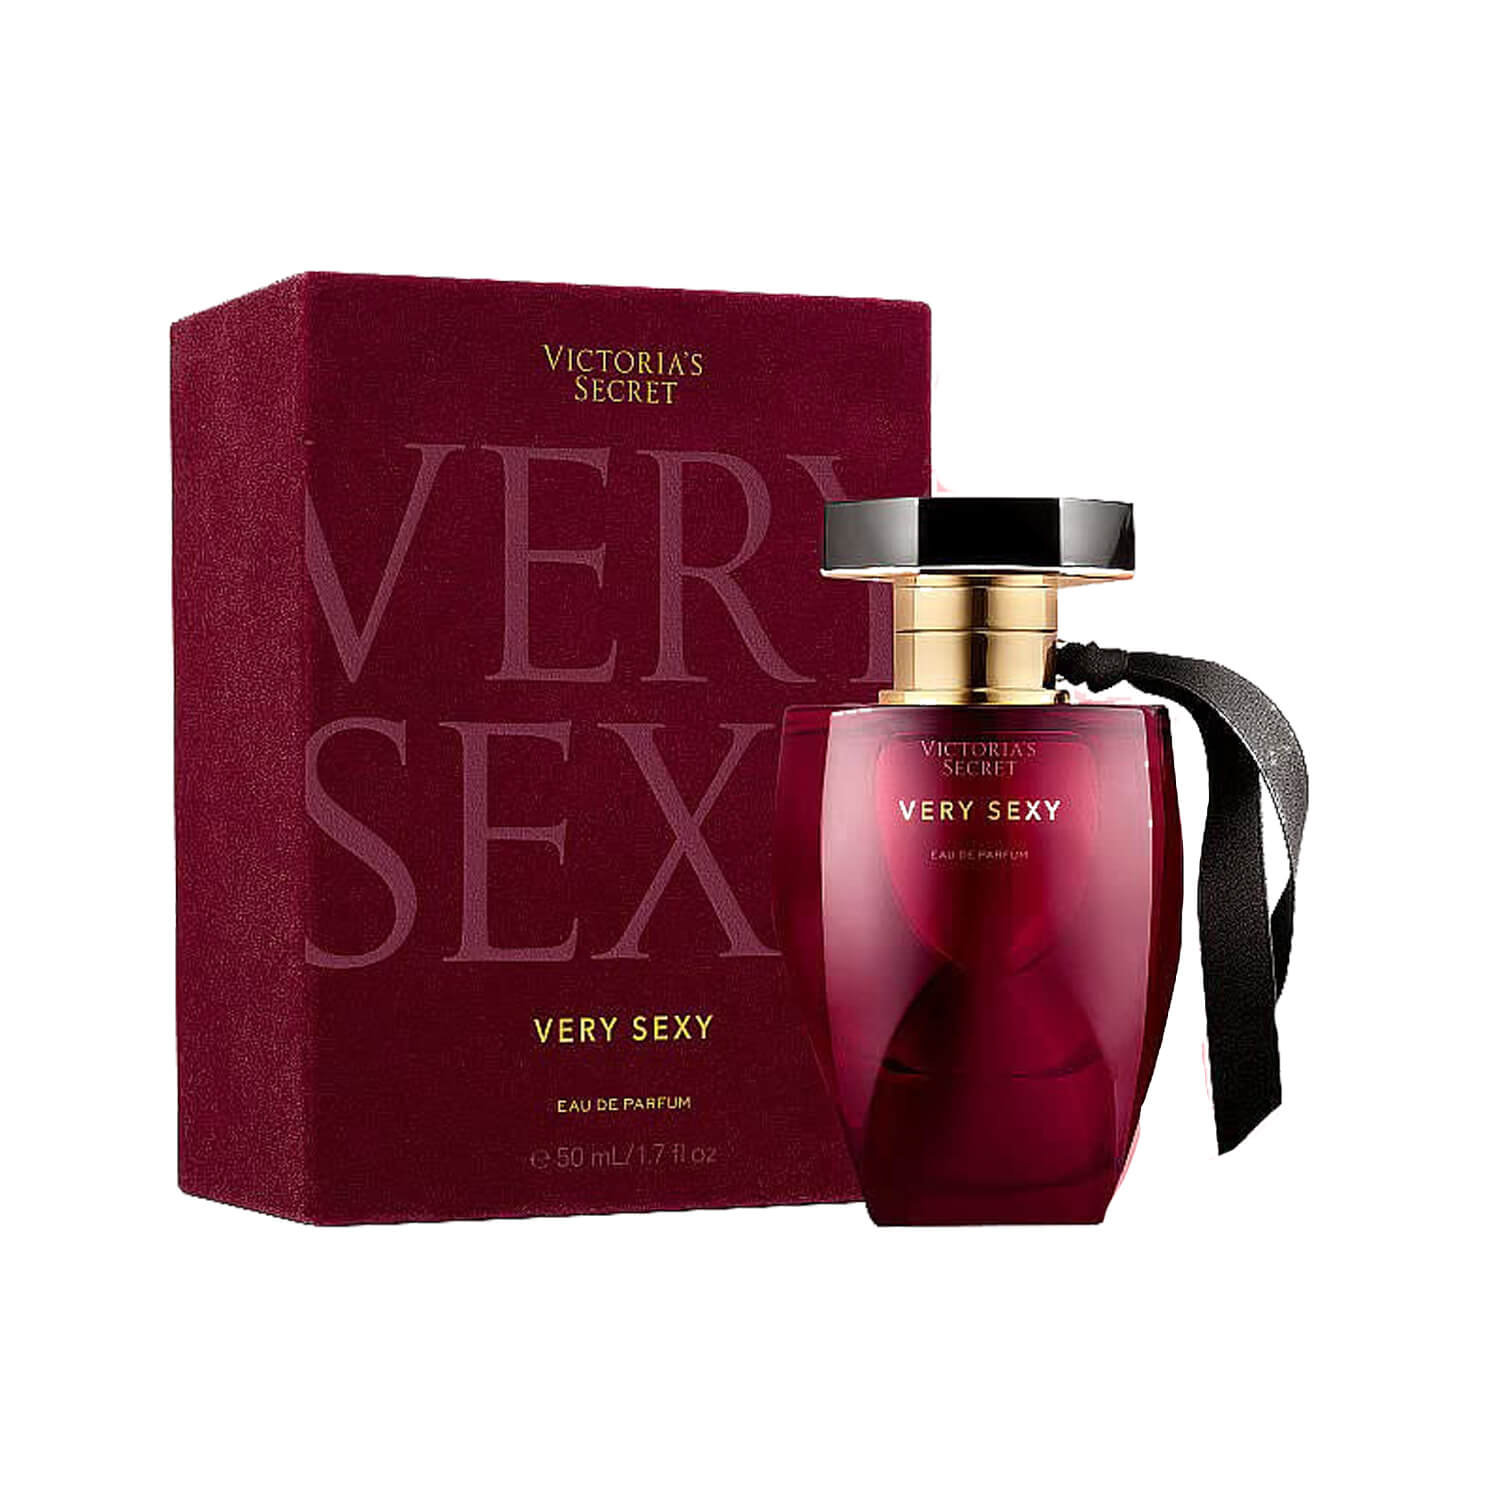 Shop Victoria's Secret Eau De Parfum in Very Sexy fragrance available at Heygirl.pk for delivery in Pakistan